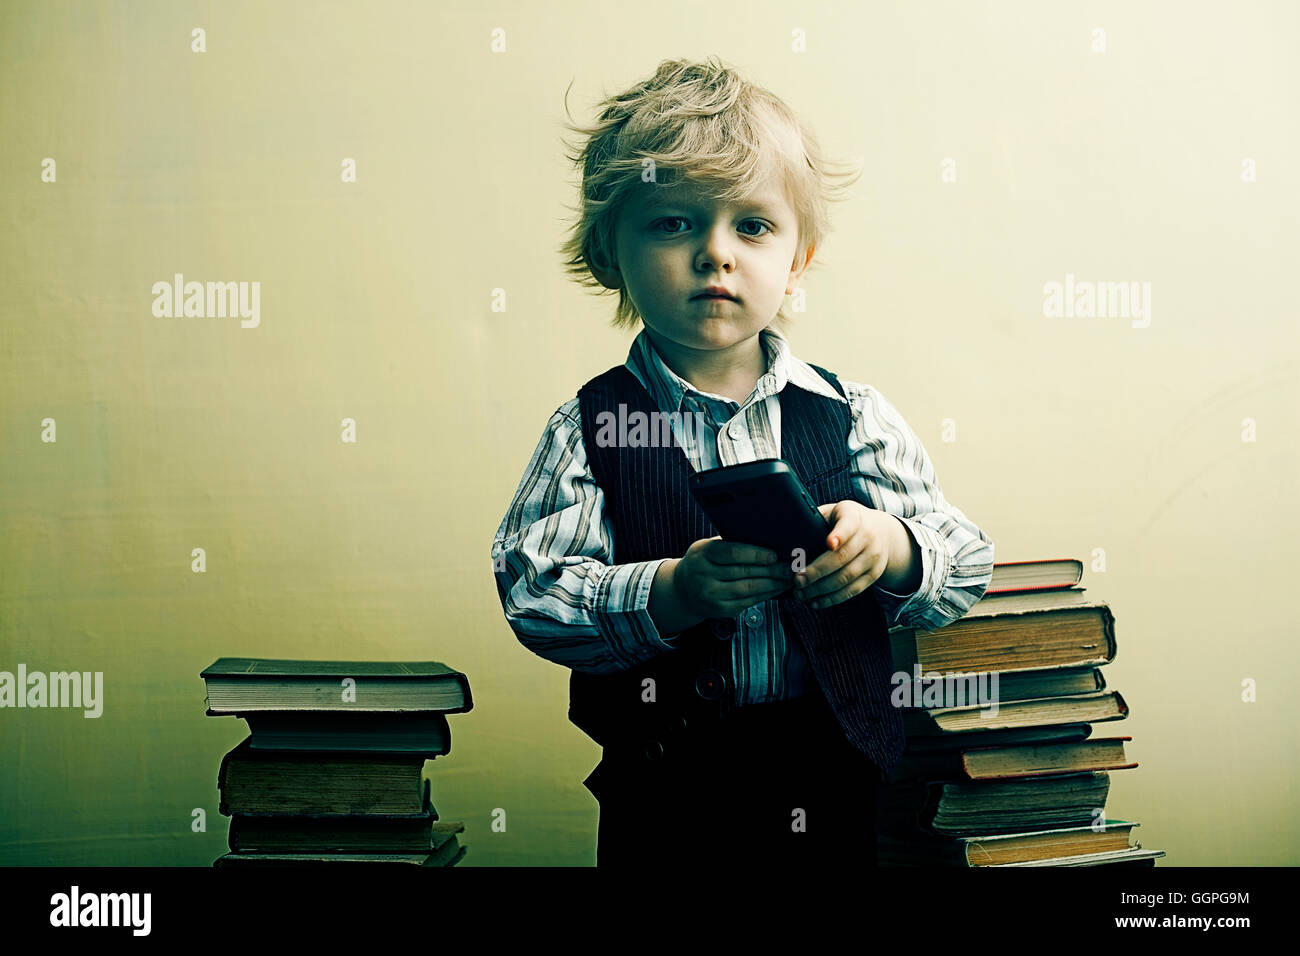 Boy holding cell phone near stacks of books Stock Photo